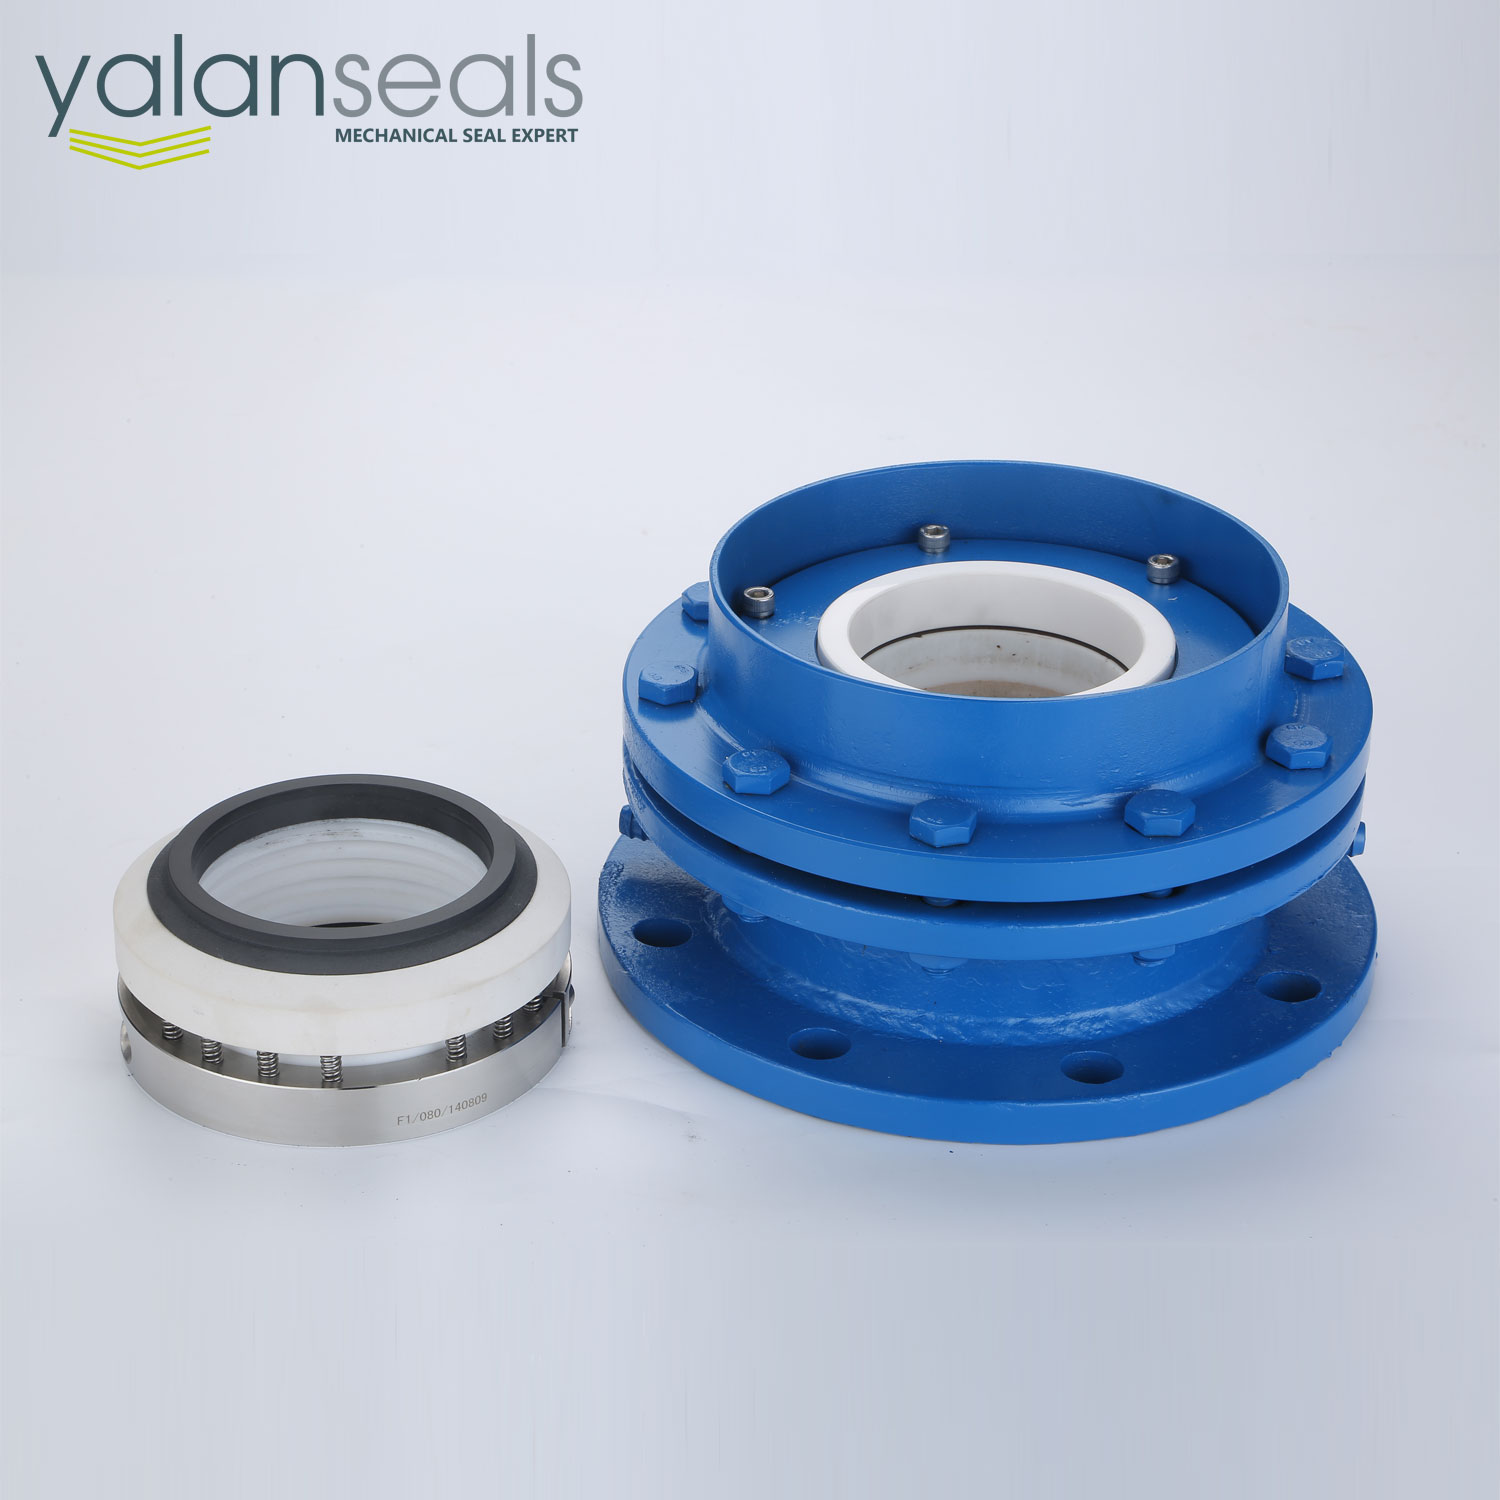 Type 212 Mechanical Seal with Oil Basin for Mixers